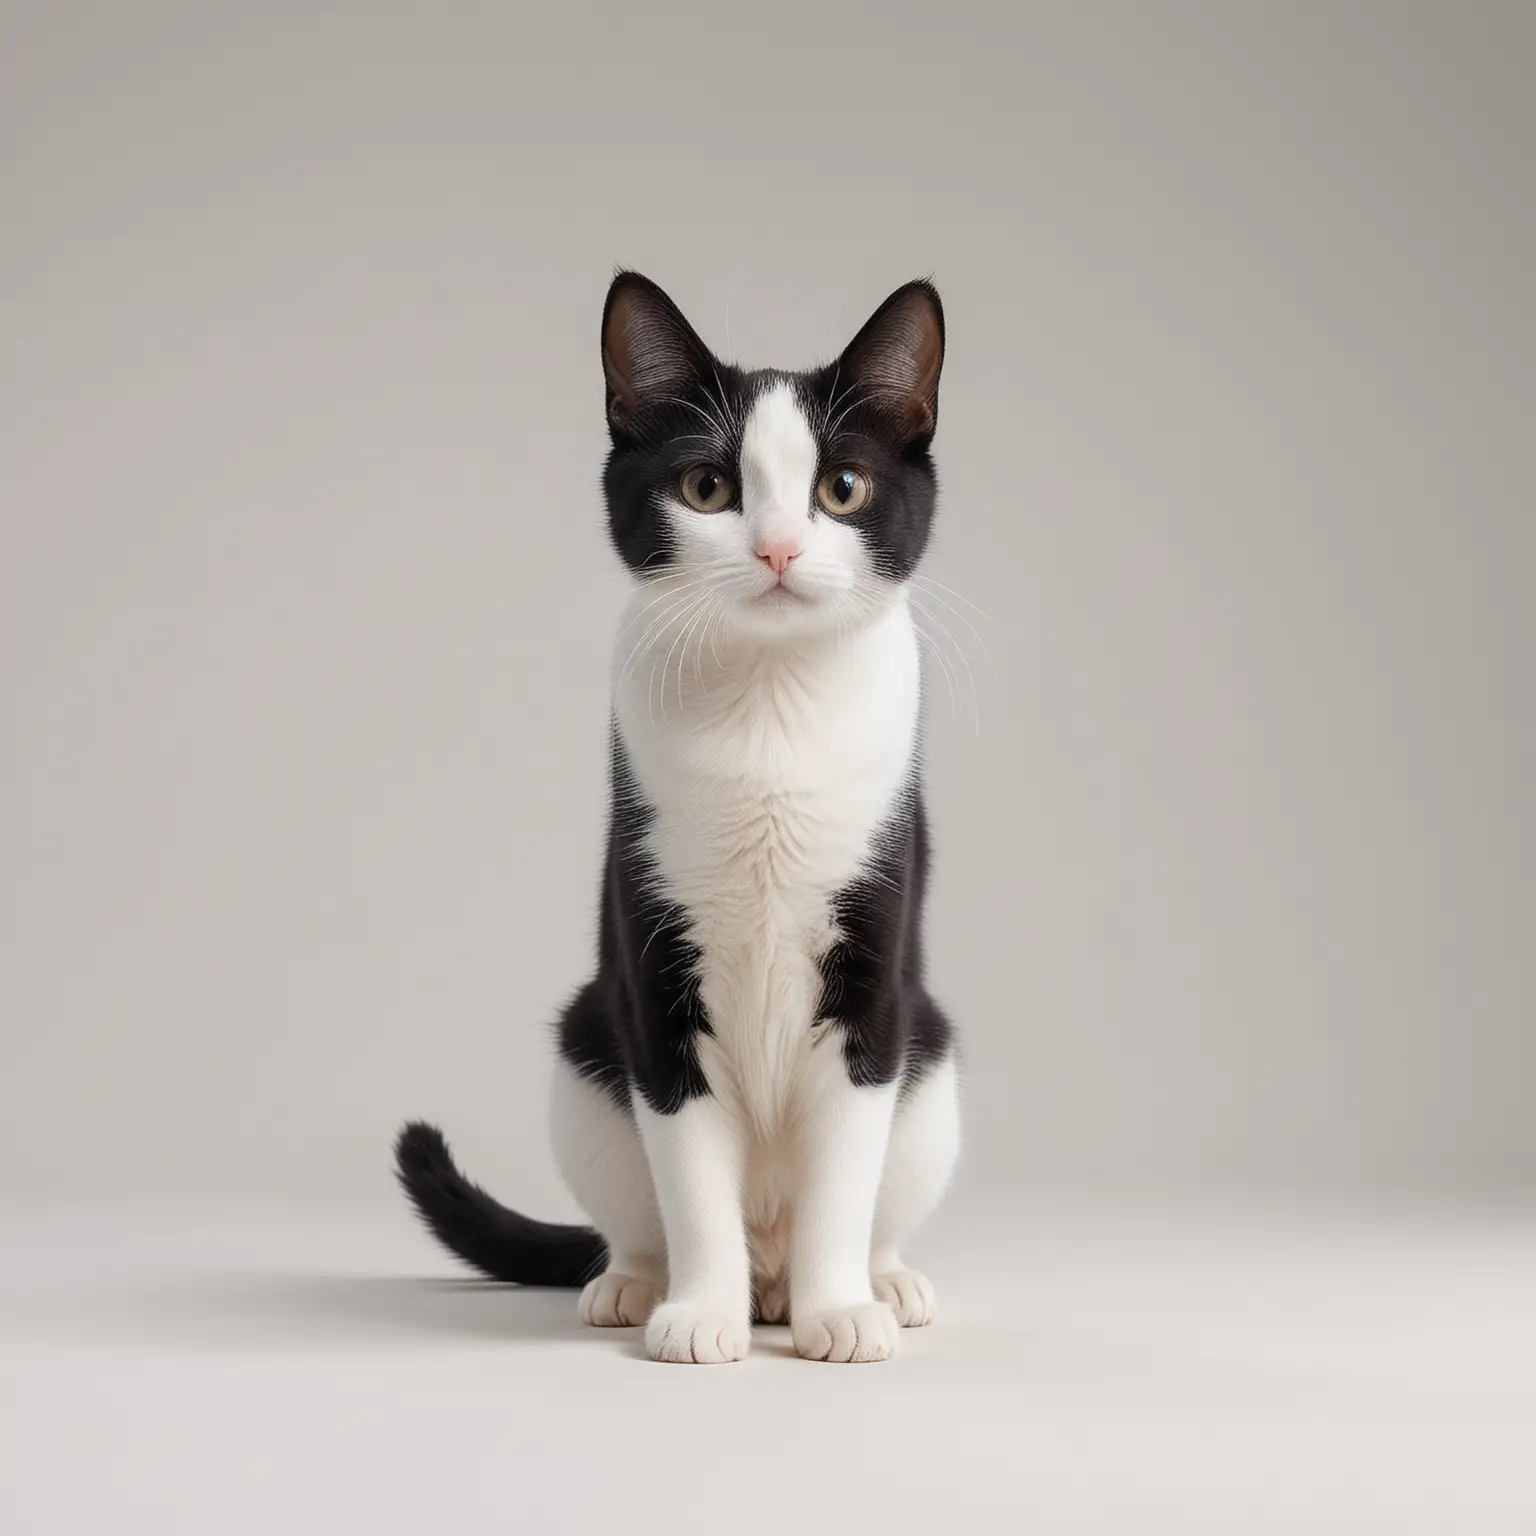 Adorable Black and White Cat in Fairytale Poses on White Background